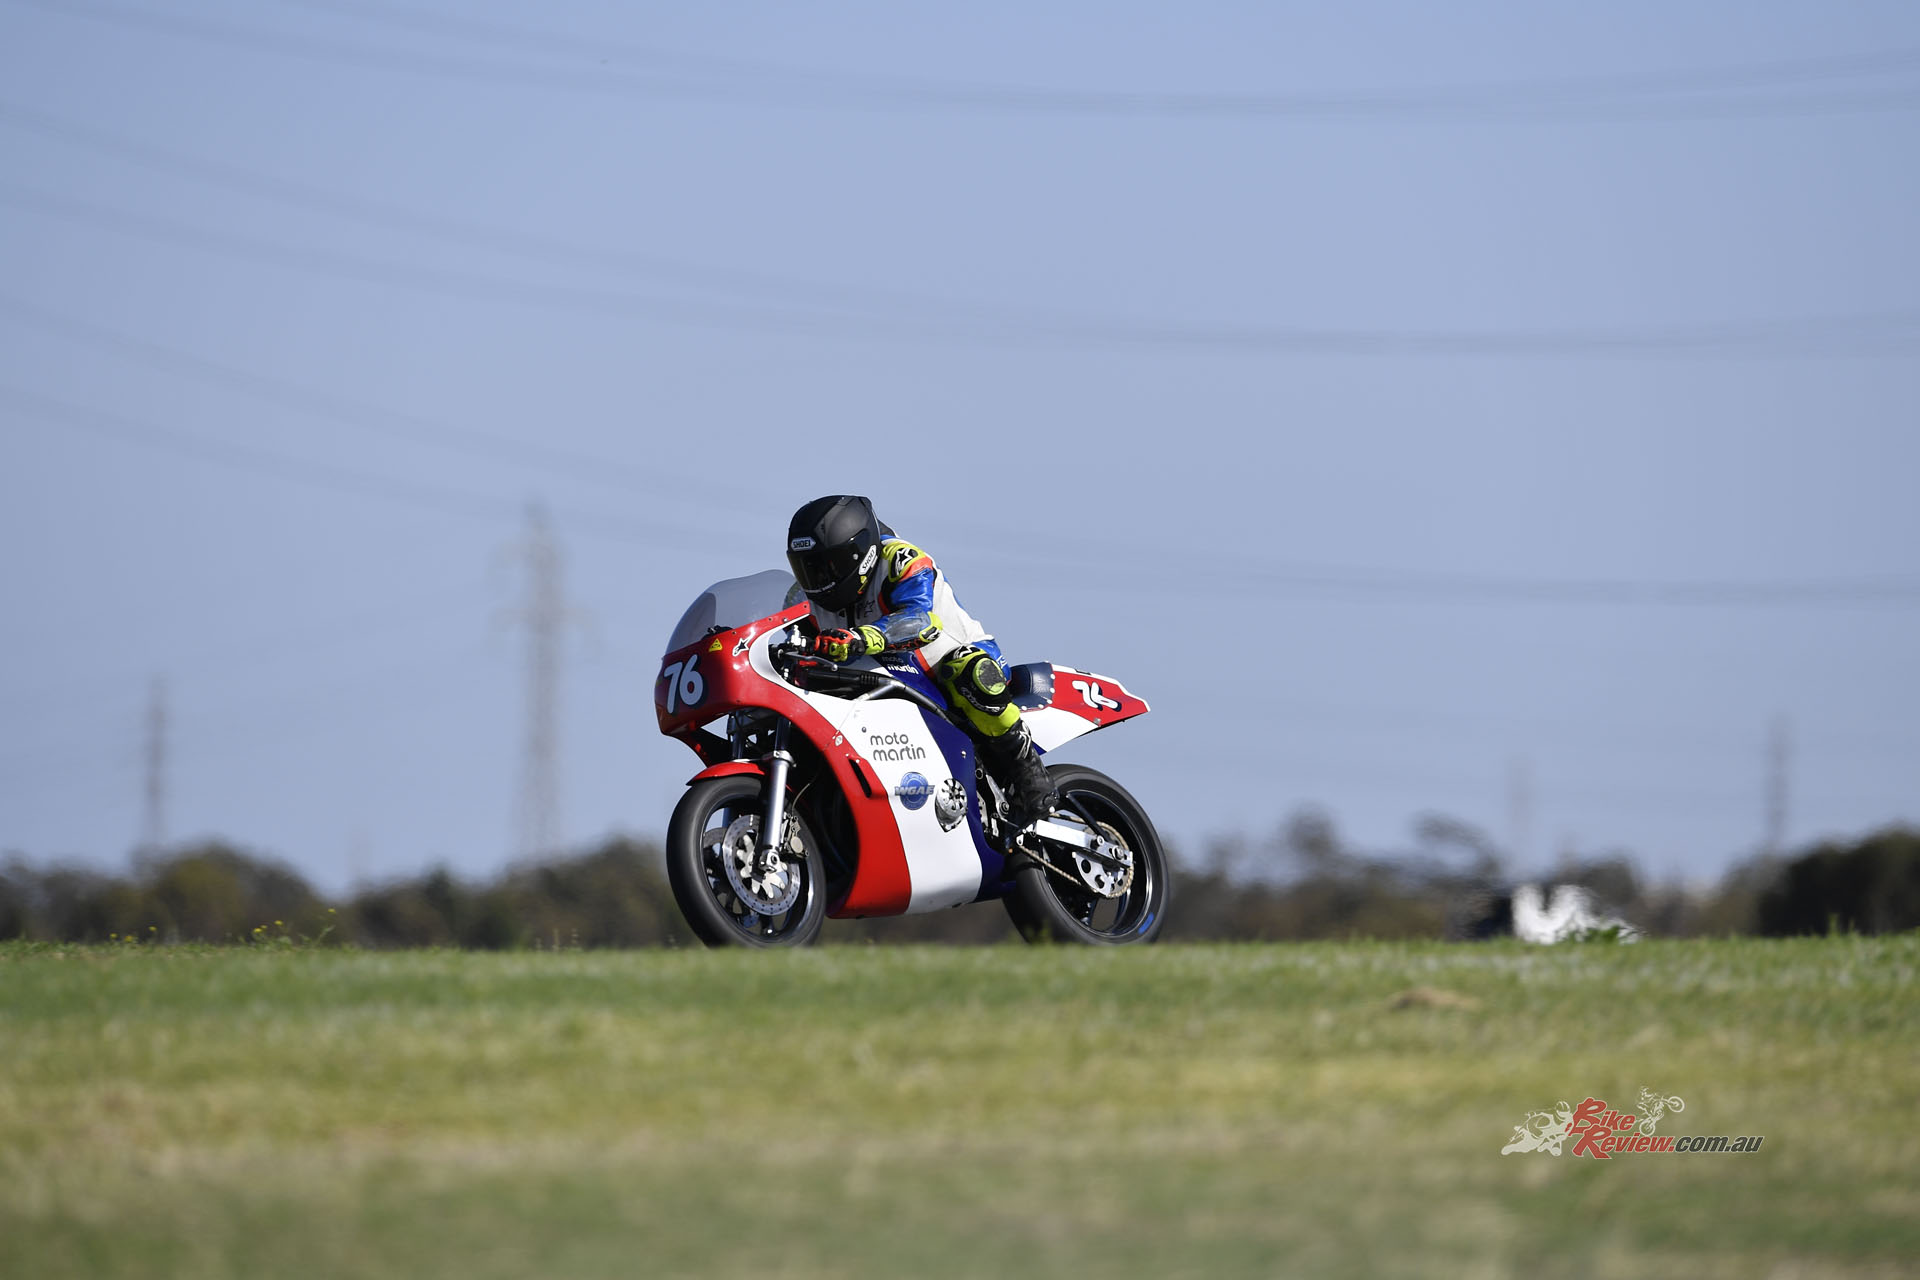 Webster has been out smashing the Moto Martin Suzuki in the ASBK support series, Superbike Masters.